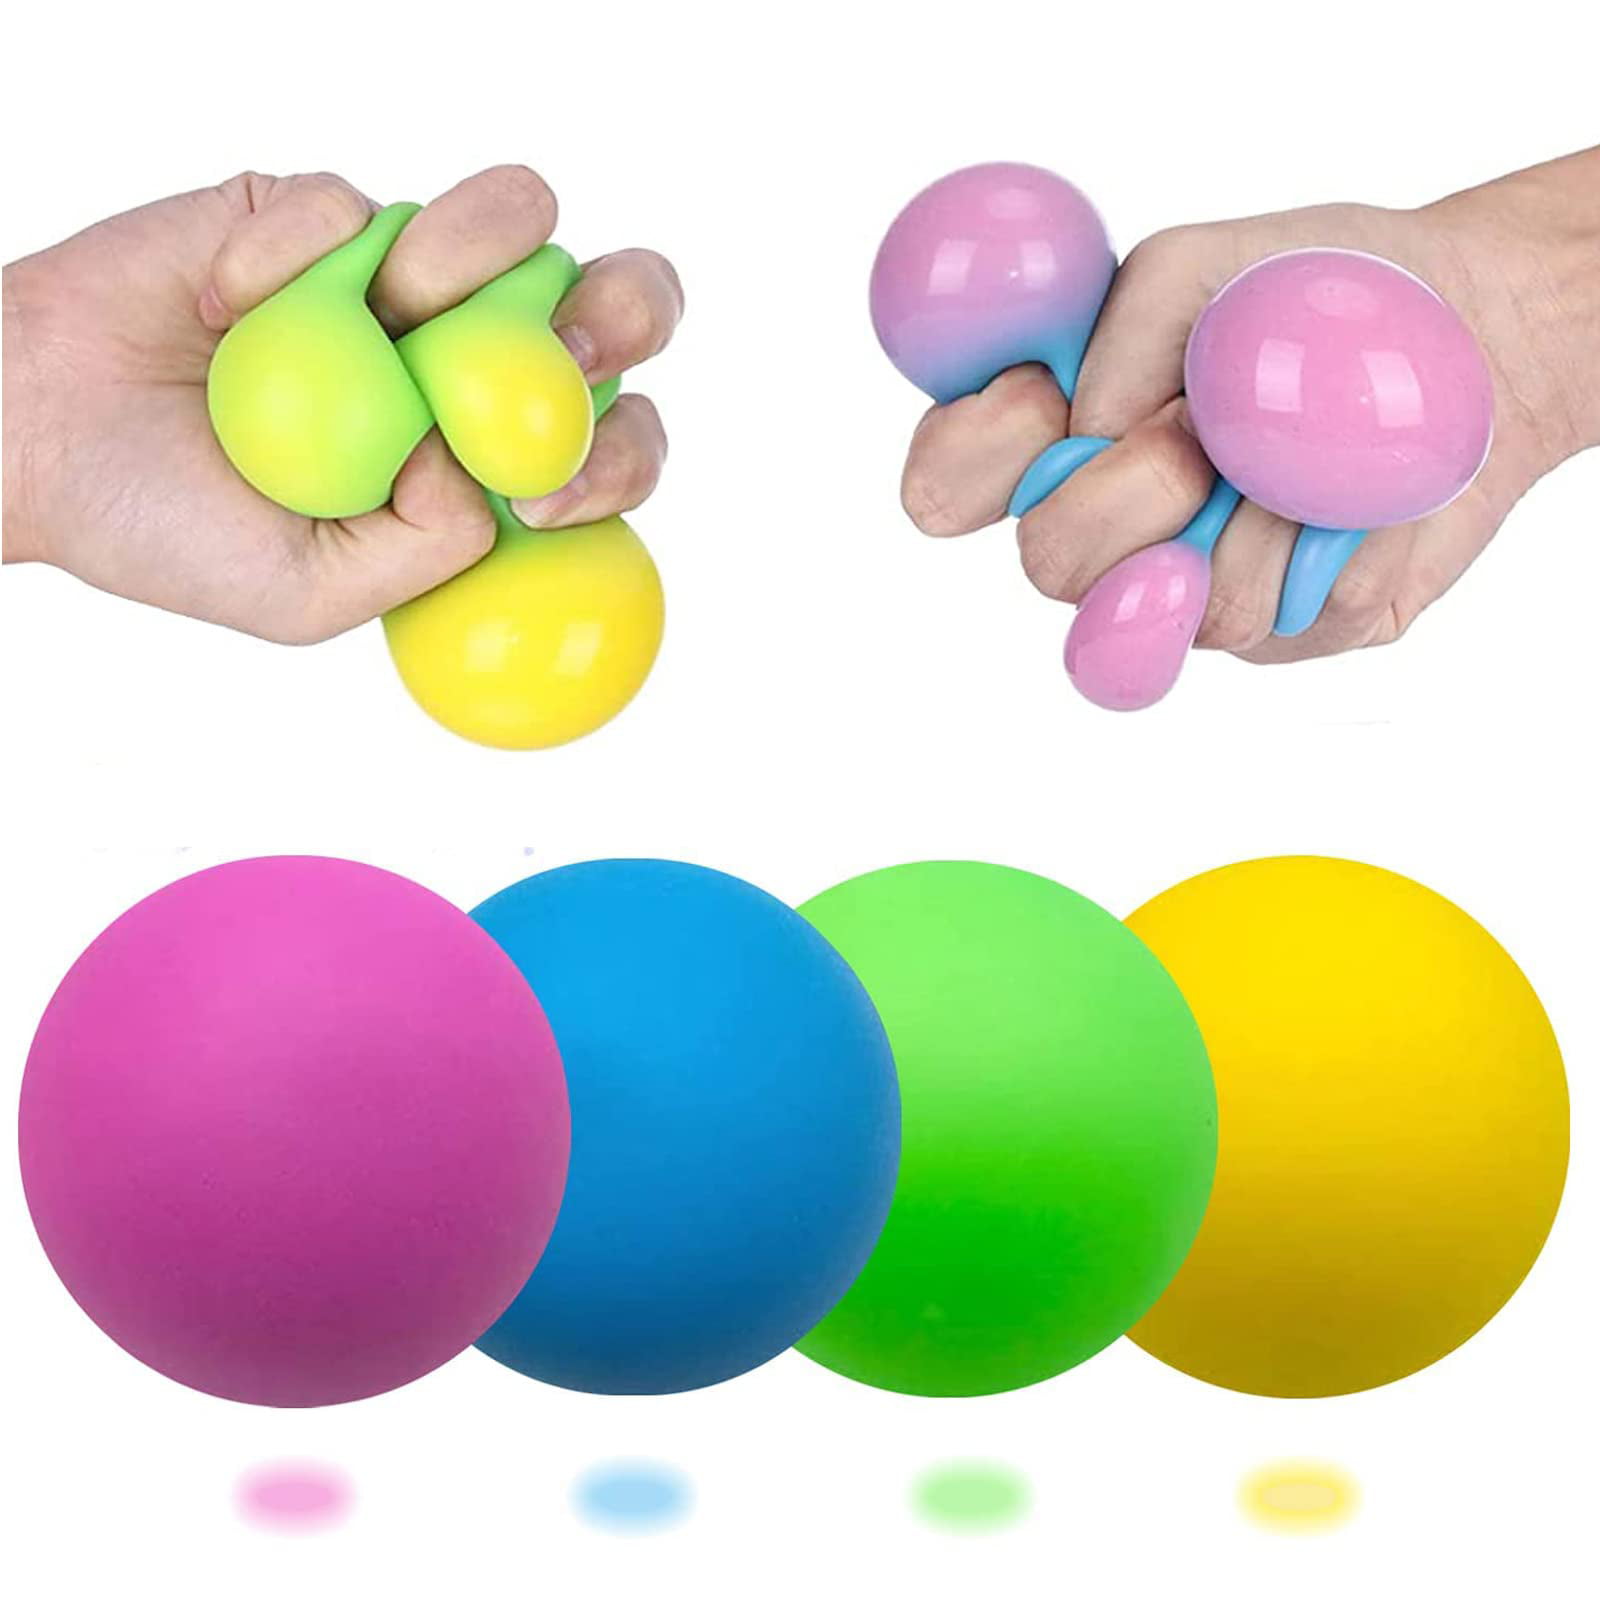 1 Squishy squeeze dough stress ball autism toy special needs 